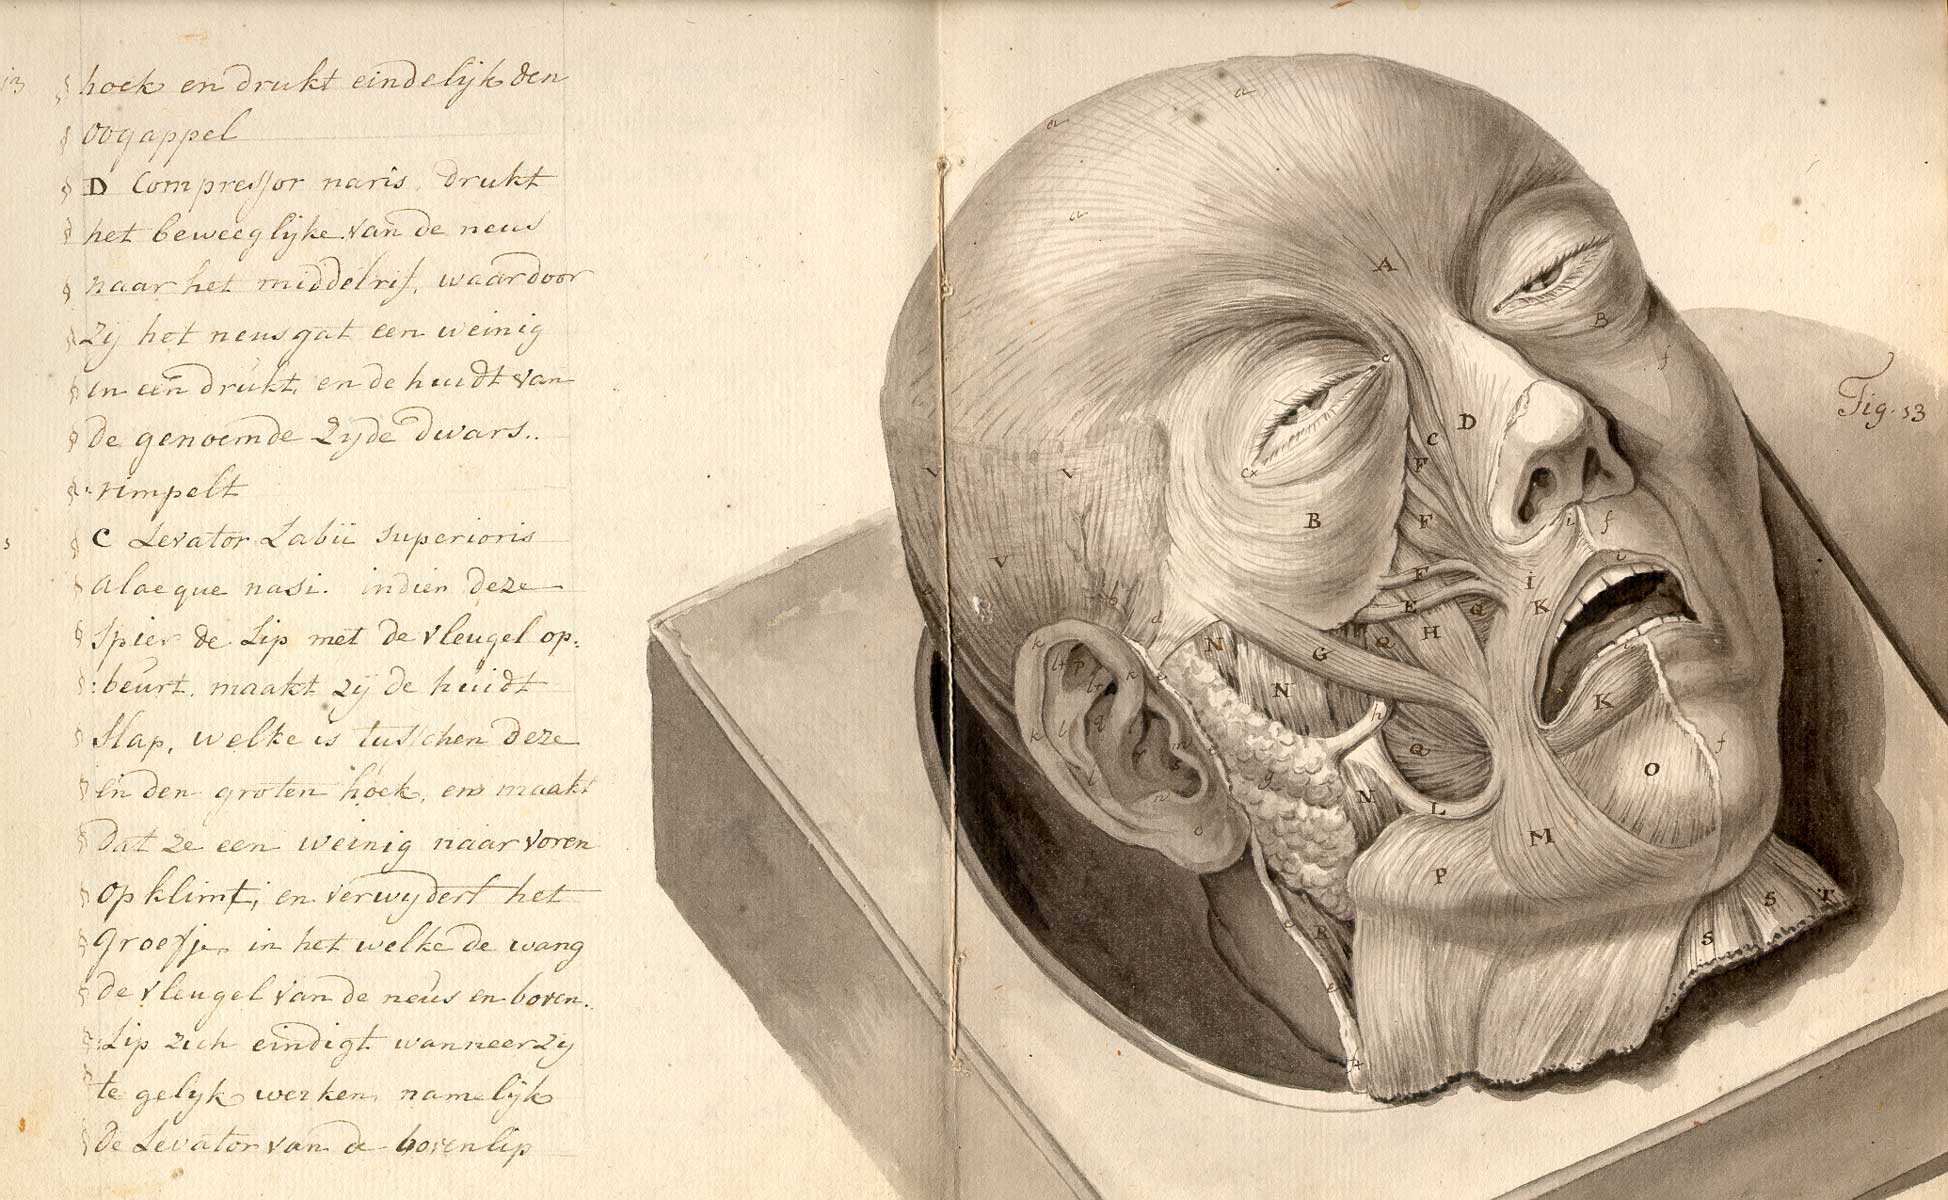 Manuscript drawing of a disembodied head laying on a wooden plank with all the skin removed, showing the muscles of the face in detail; the head is face up at an angle with eyes slightly open; there is manuscript text in Dutch on the left side of the page.